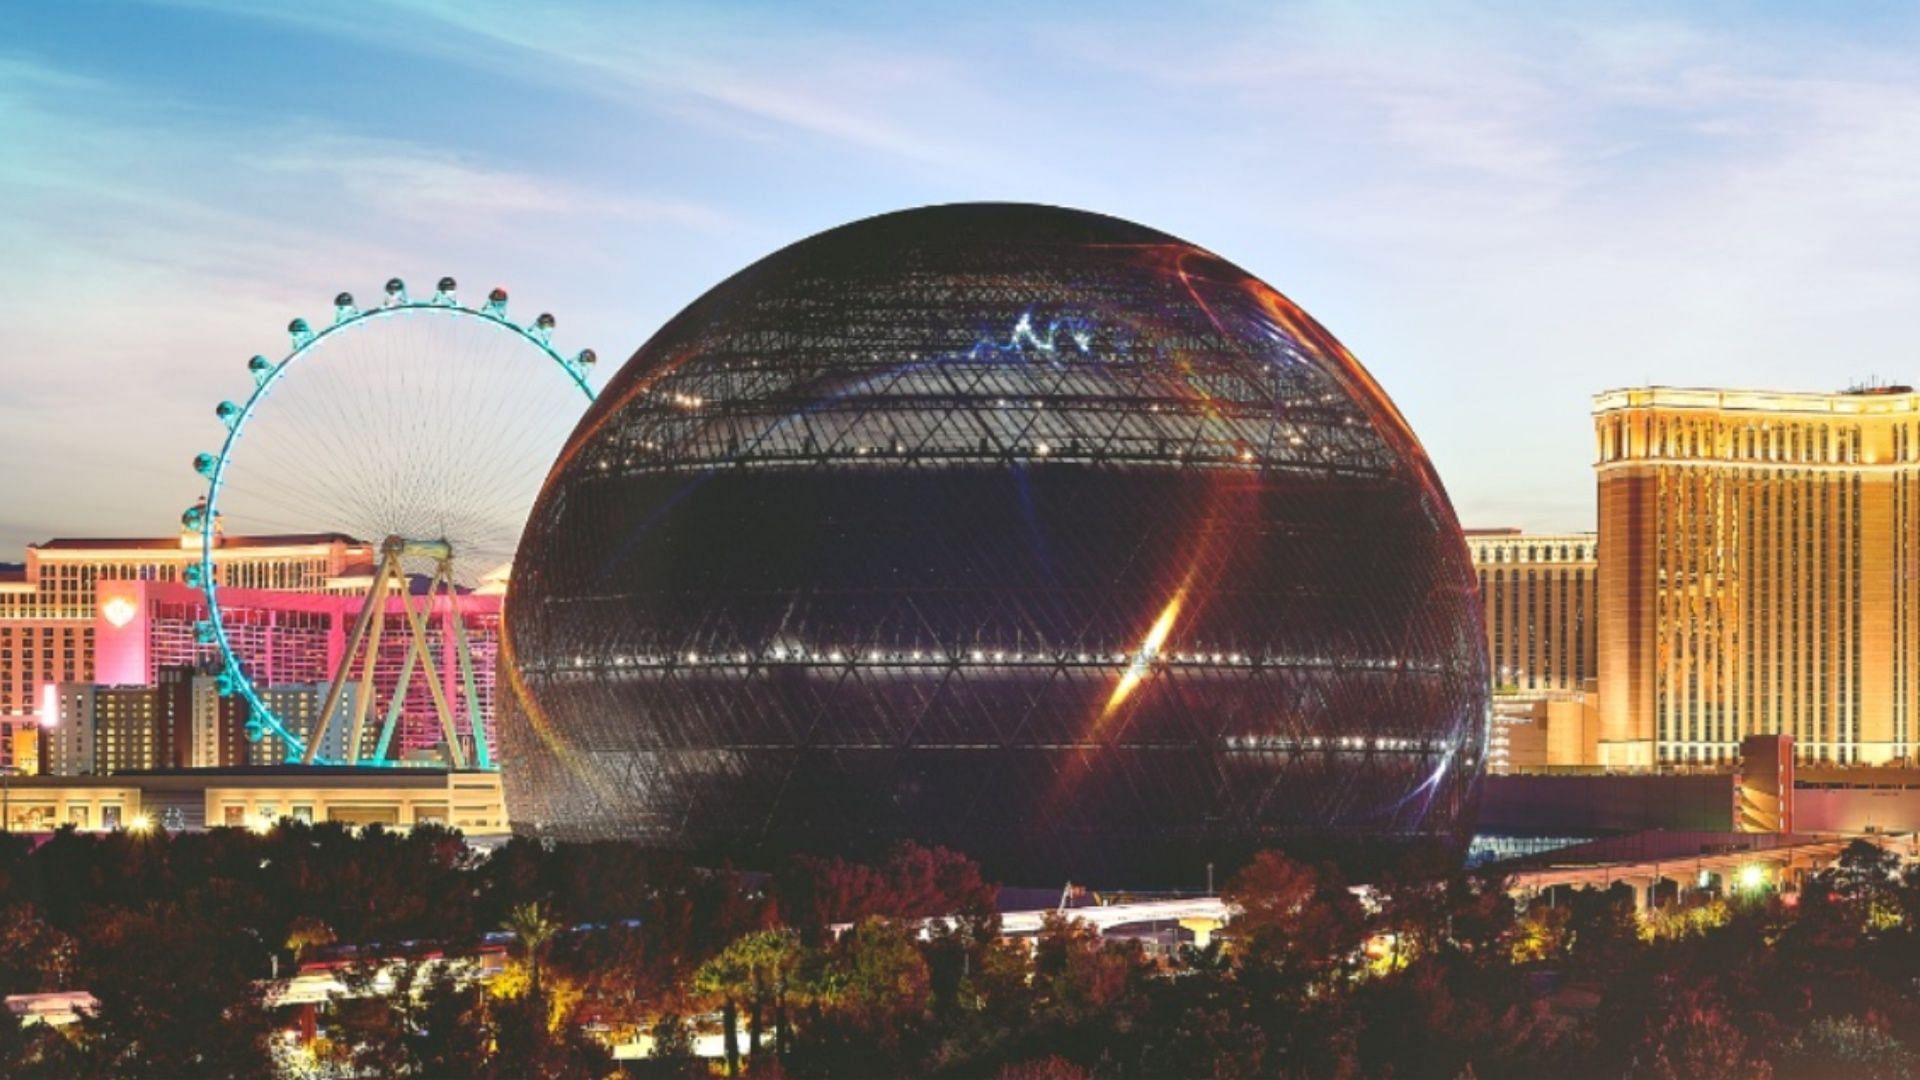 MSG Sphere is also called The Sphere and is located in Las Vegas. (Image via Twitter/Sphere)